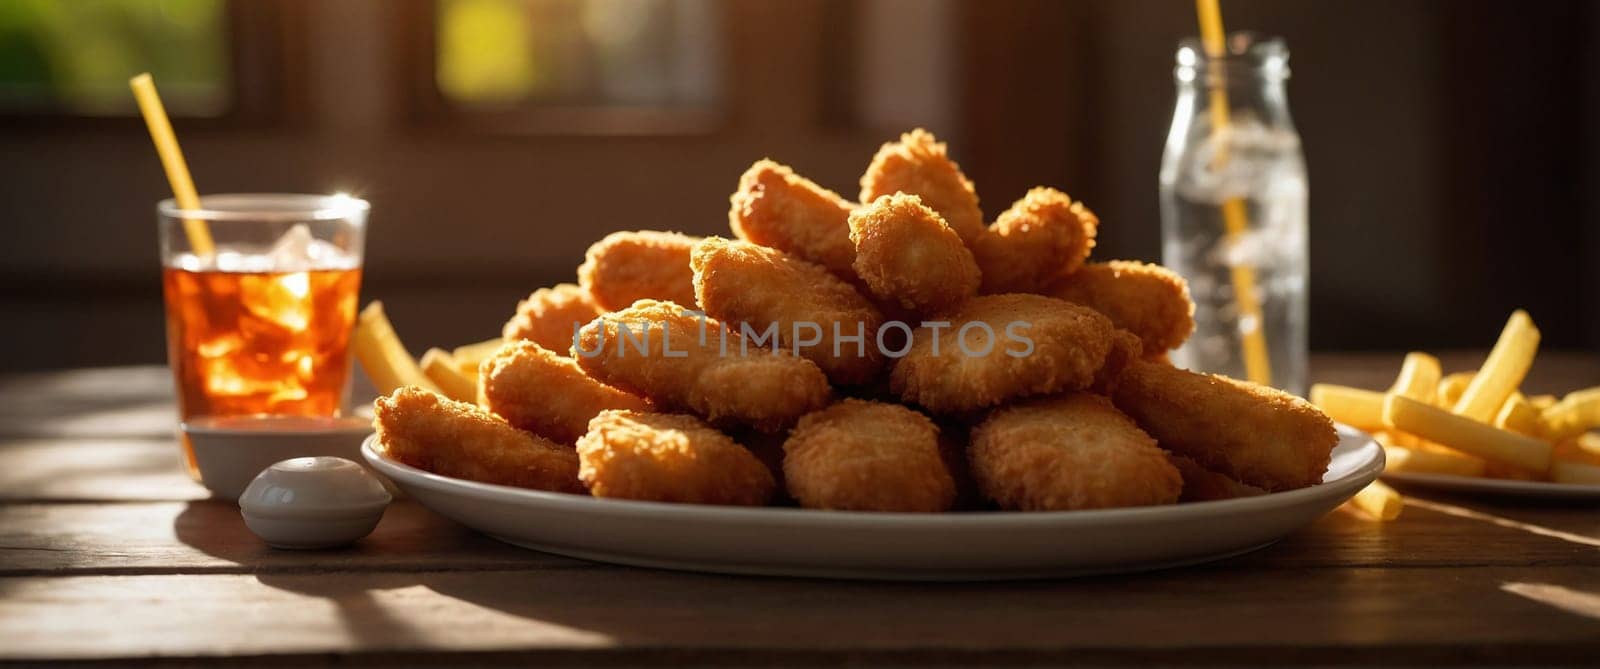 plate of chicken nuggets and french fries, wide horizontal ratio, blurred background bokeh effect, by verbano